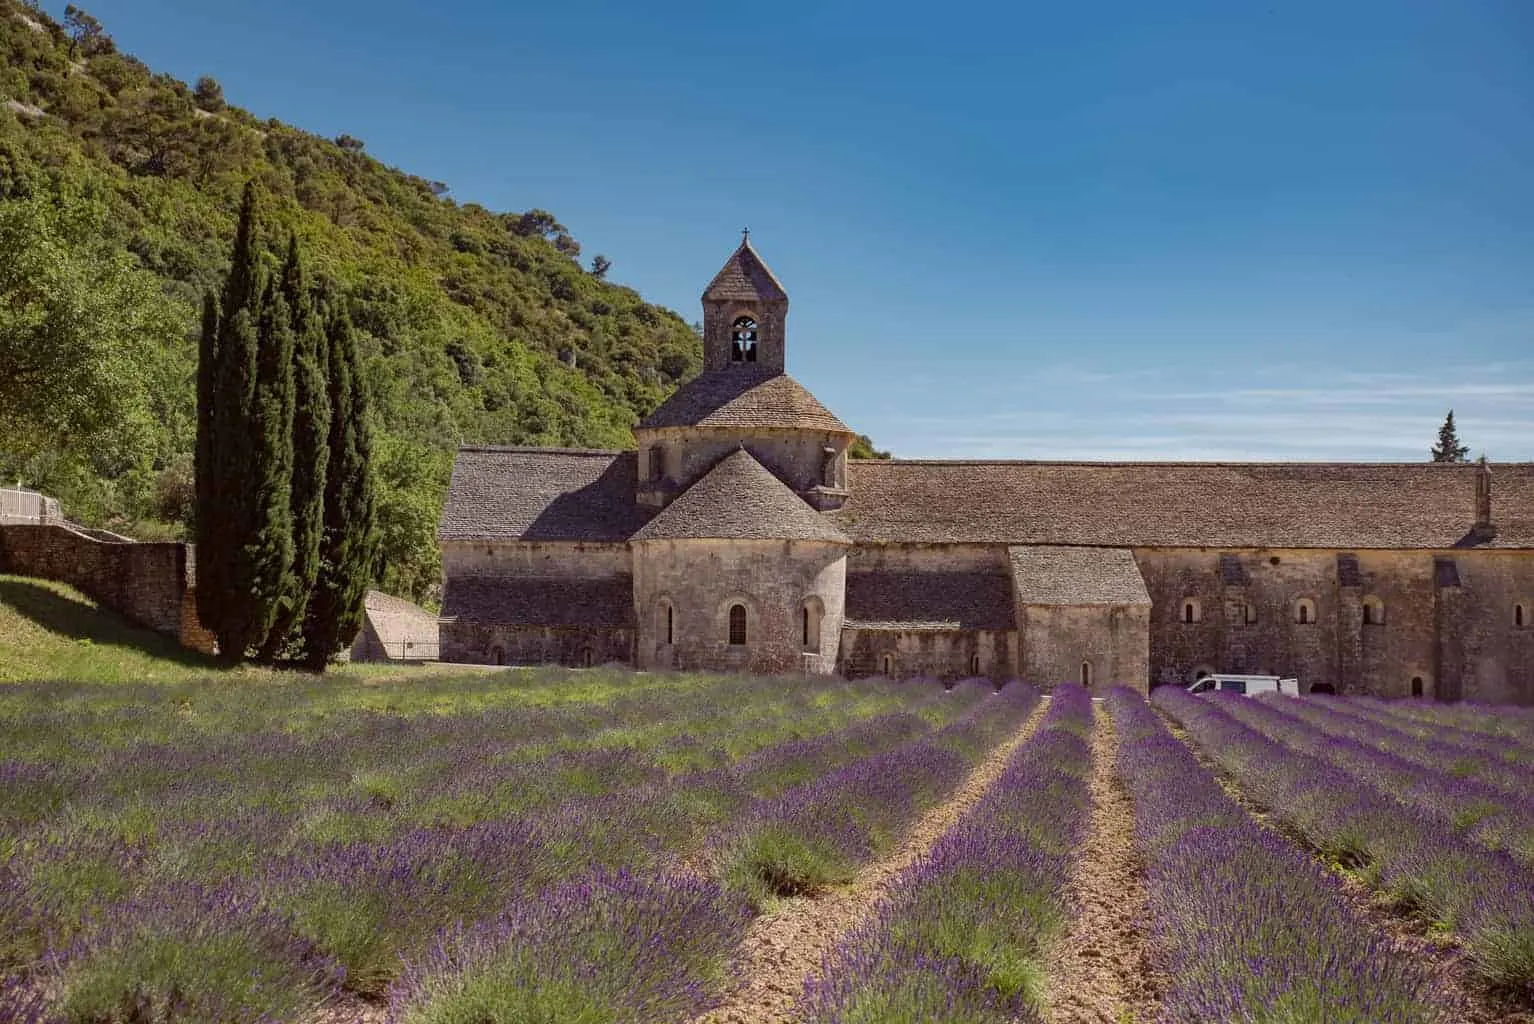 Visiting the Abbaye de Sénanque on a luxury lavender tour in Provence.